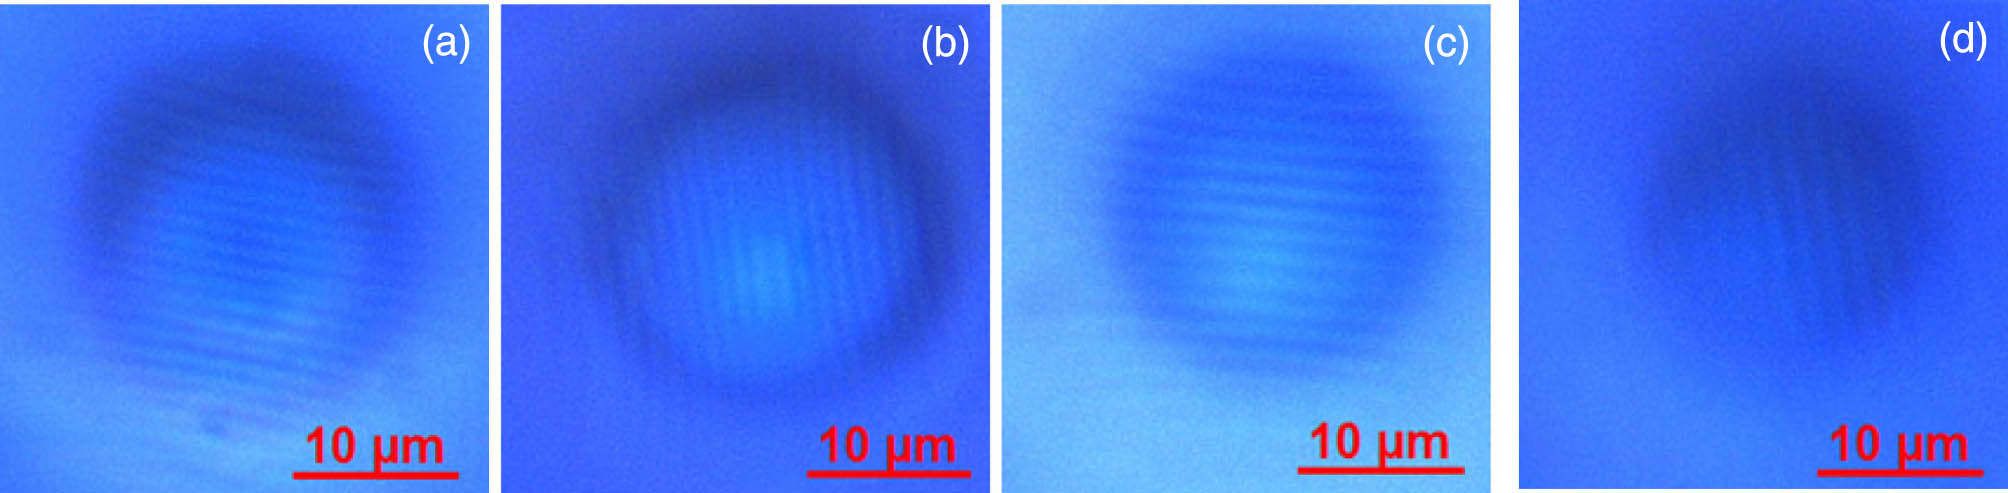 Images of the disk through the high index microsphere with a diameter of 24 μm fully immersed in liquid at different distance between the object and the microsphere: (a) 0, (b) 2.2, (c) 3.5, and (d) 5.4 μm.